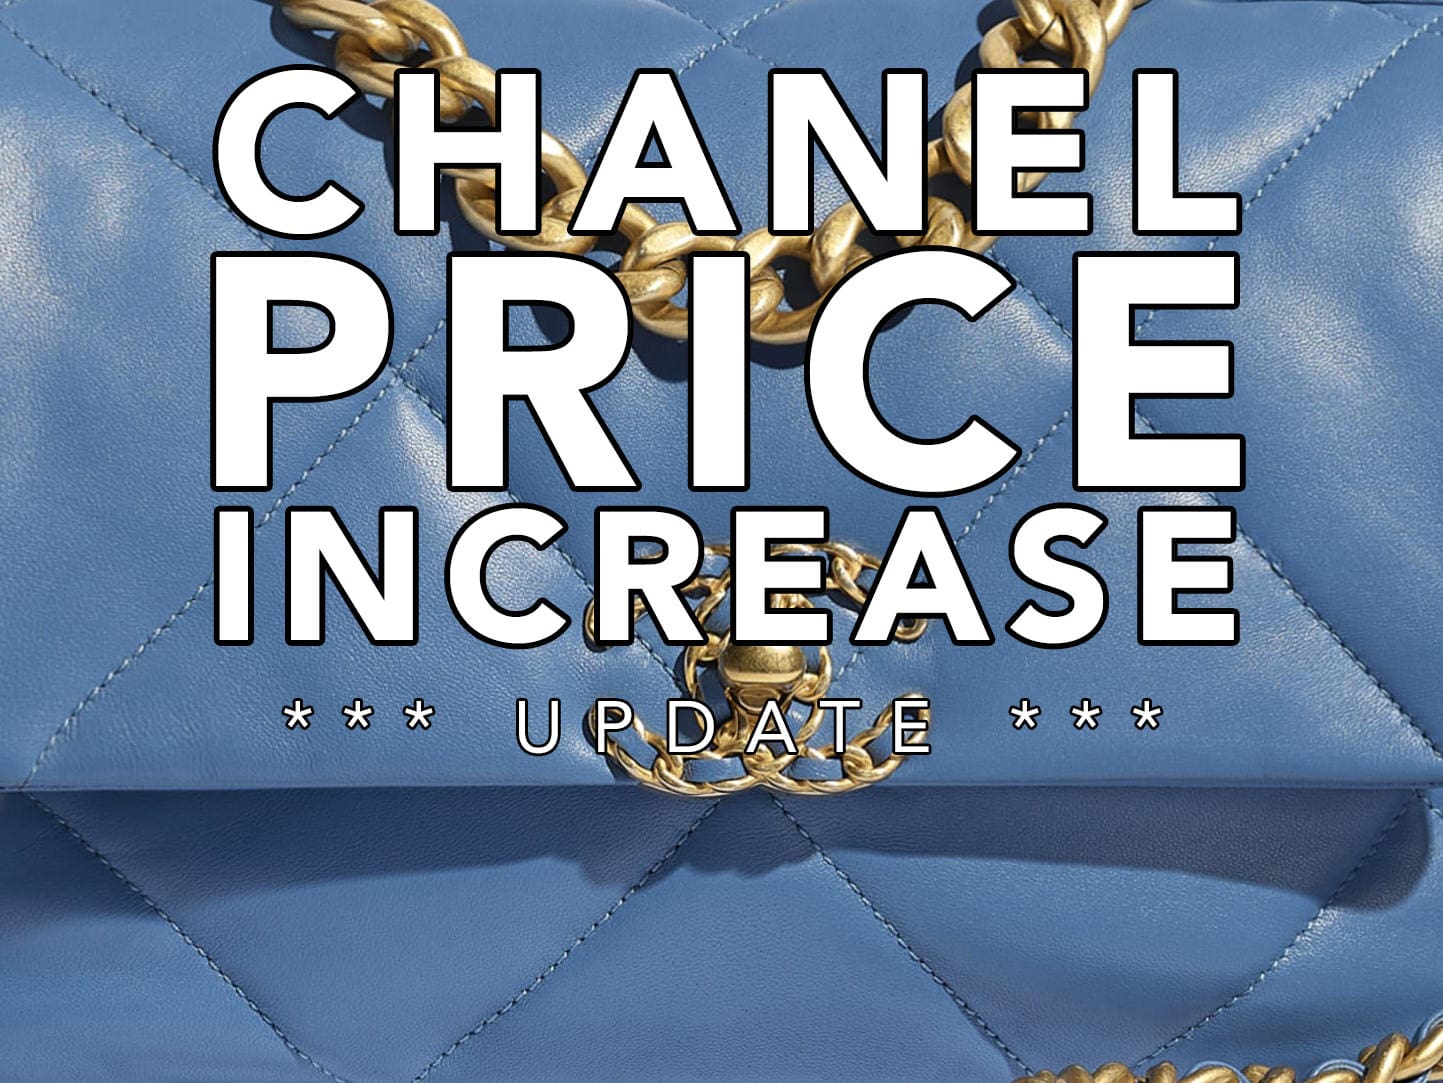 Louis Vuitton Has Instituted a Price Increase, Especially on New and  Popular Bag Designs - PurseBlog